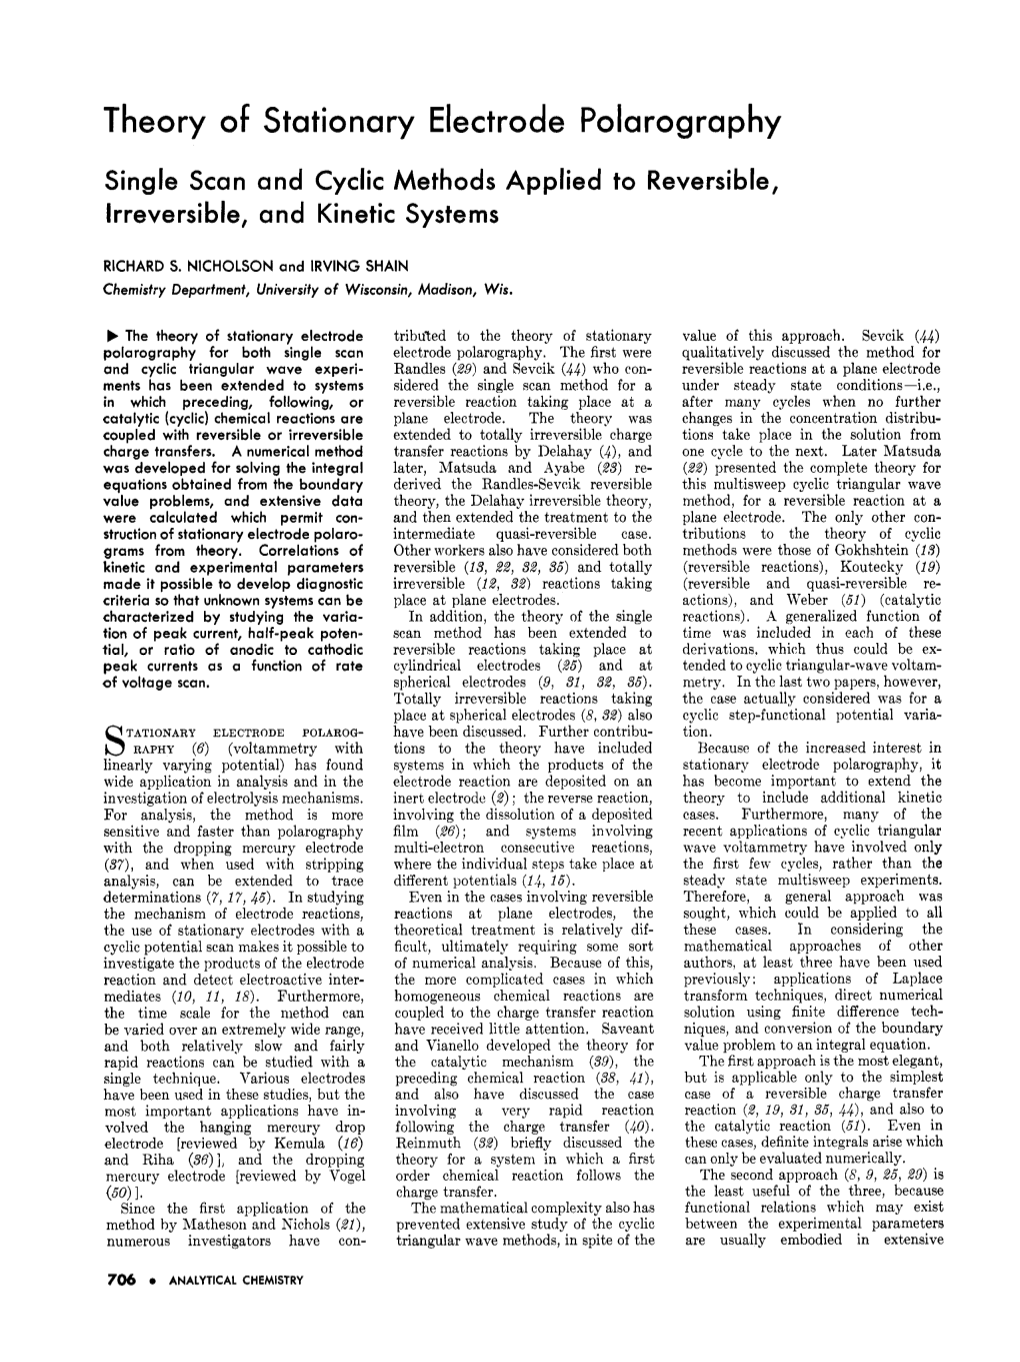 Shain and Nicholson 1964 Paper on Cyclic Voltmmetry